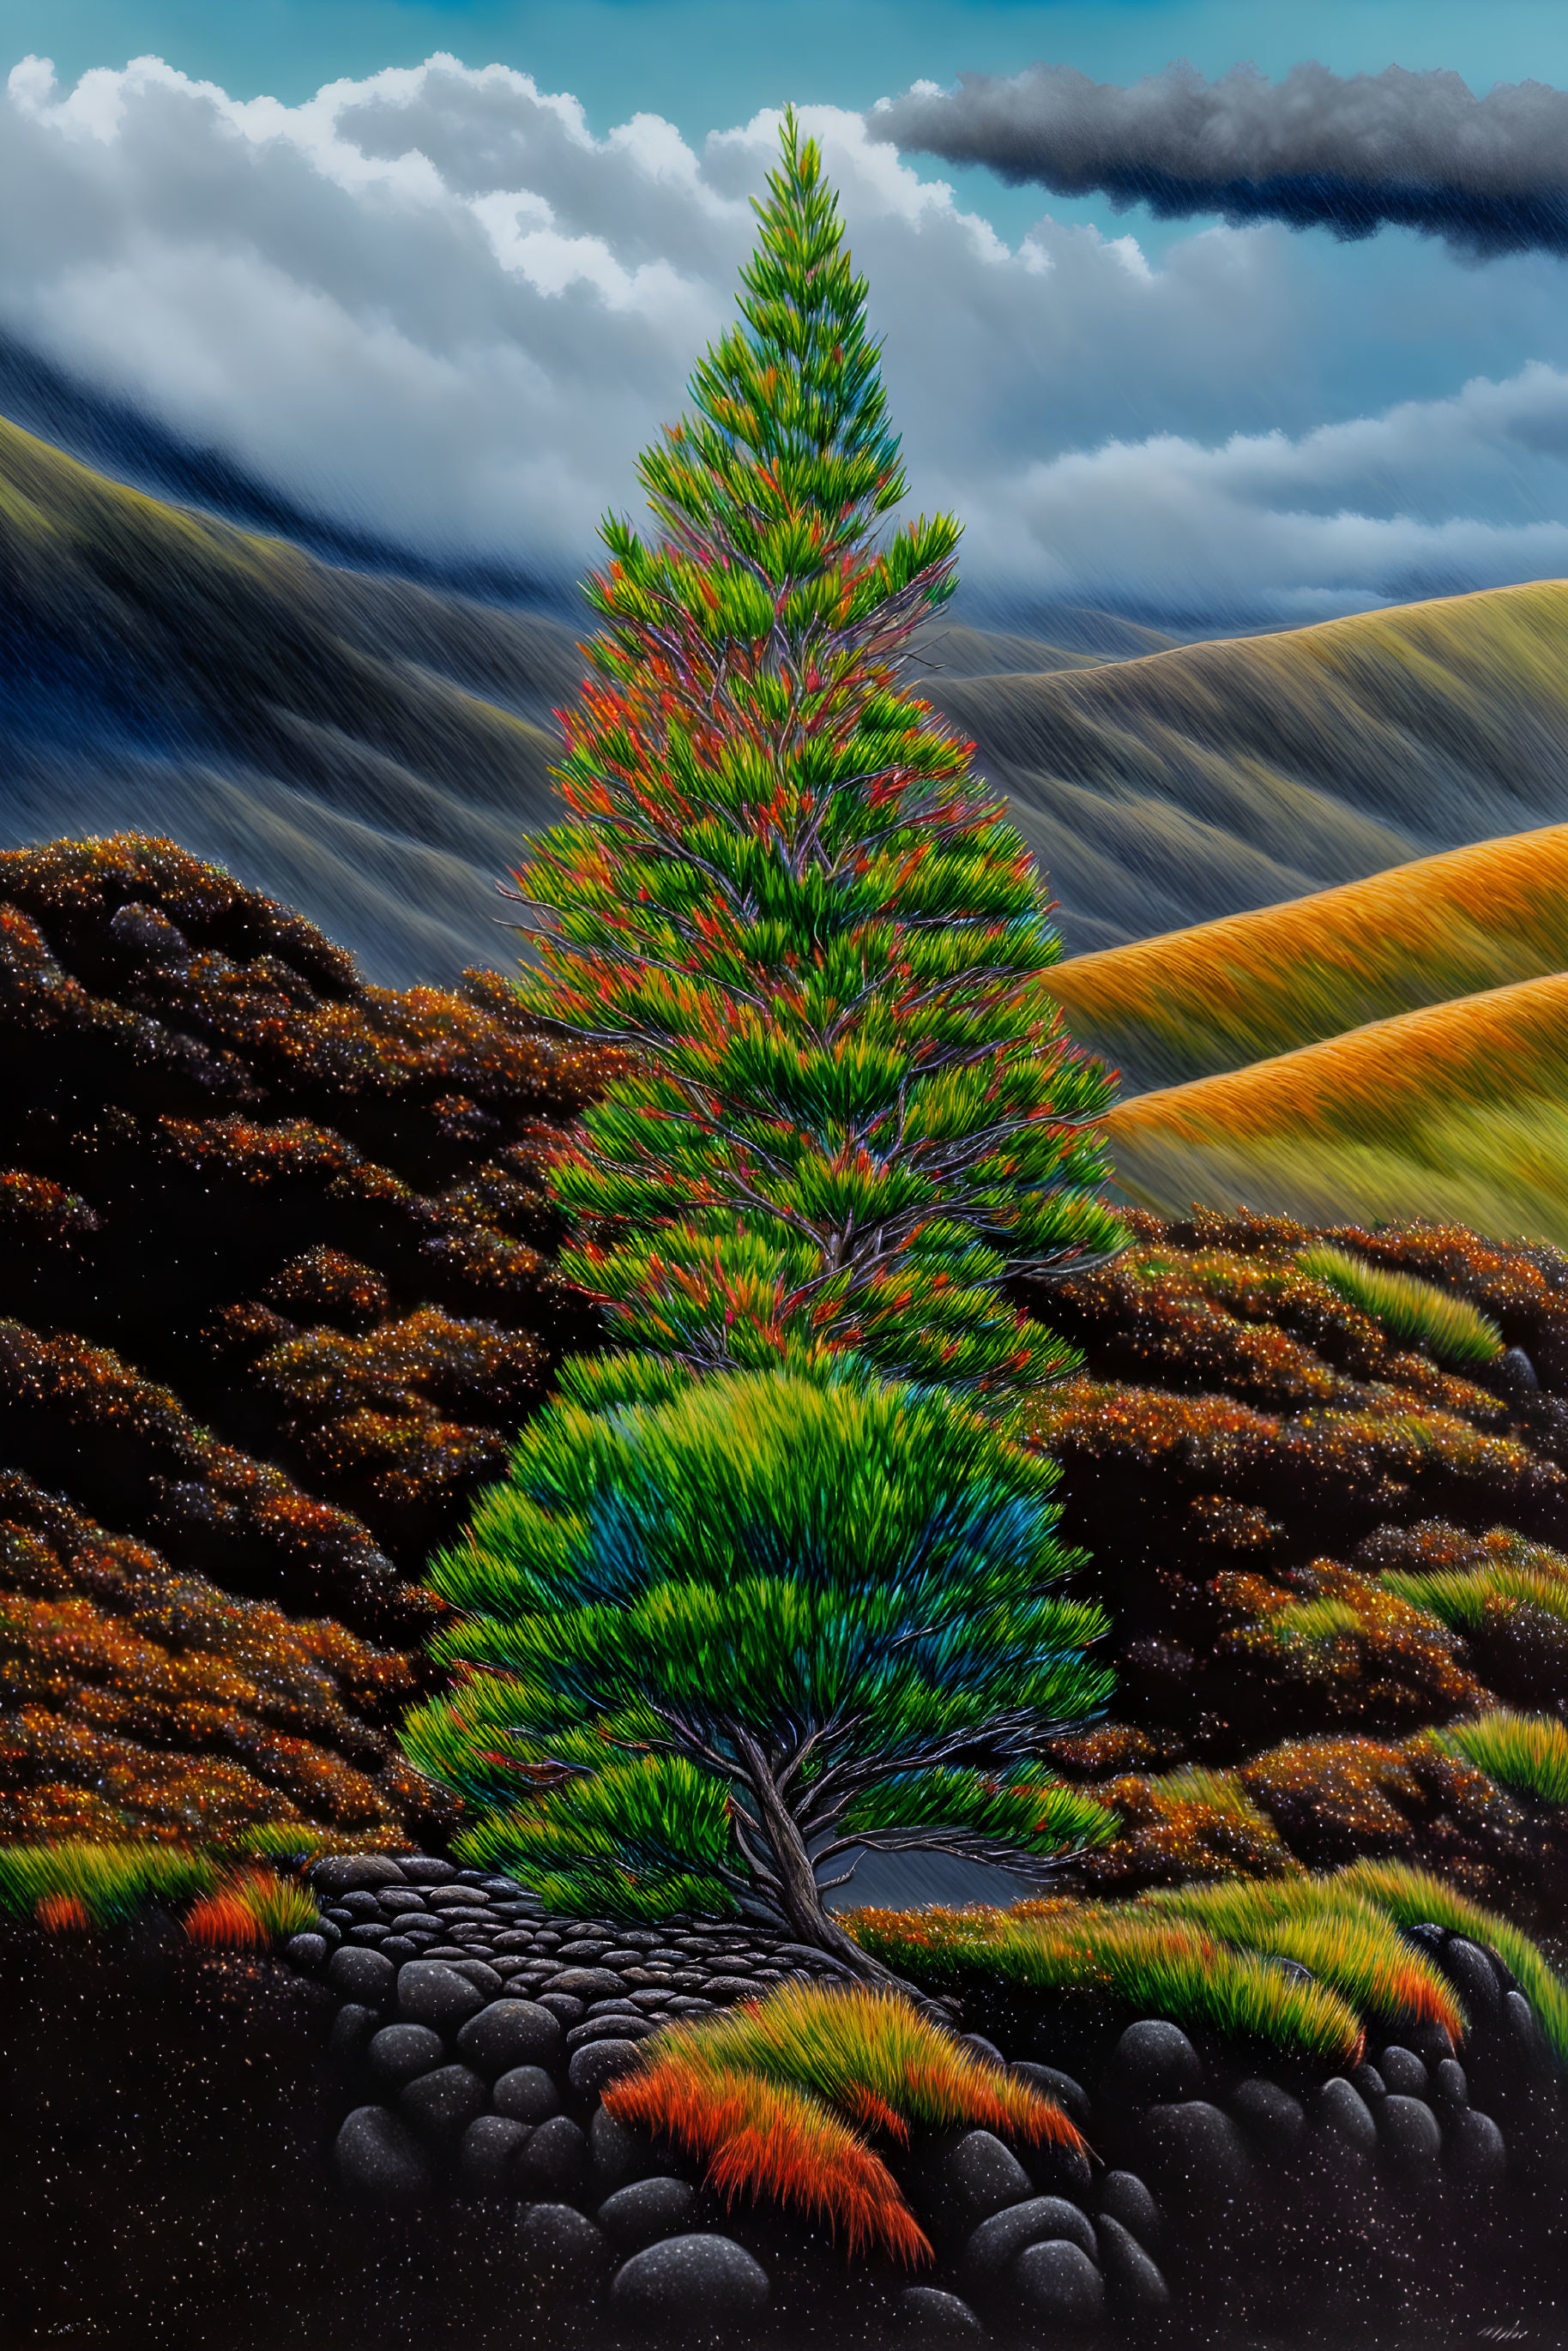 Colorful tree amidst rolling hills under dramatic sky with sunlight streams